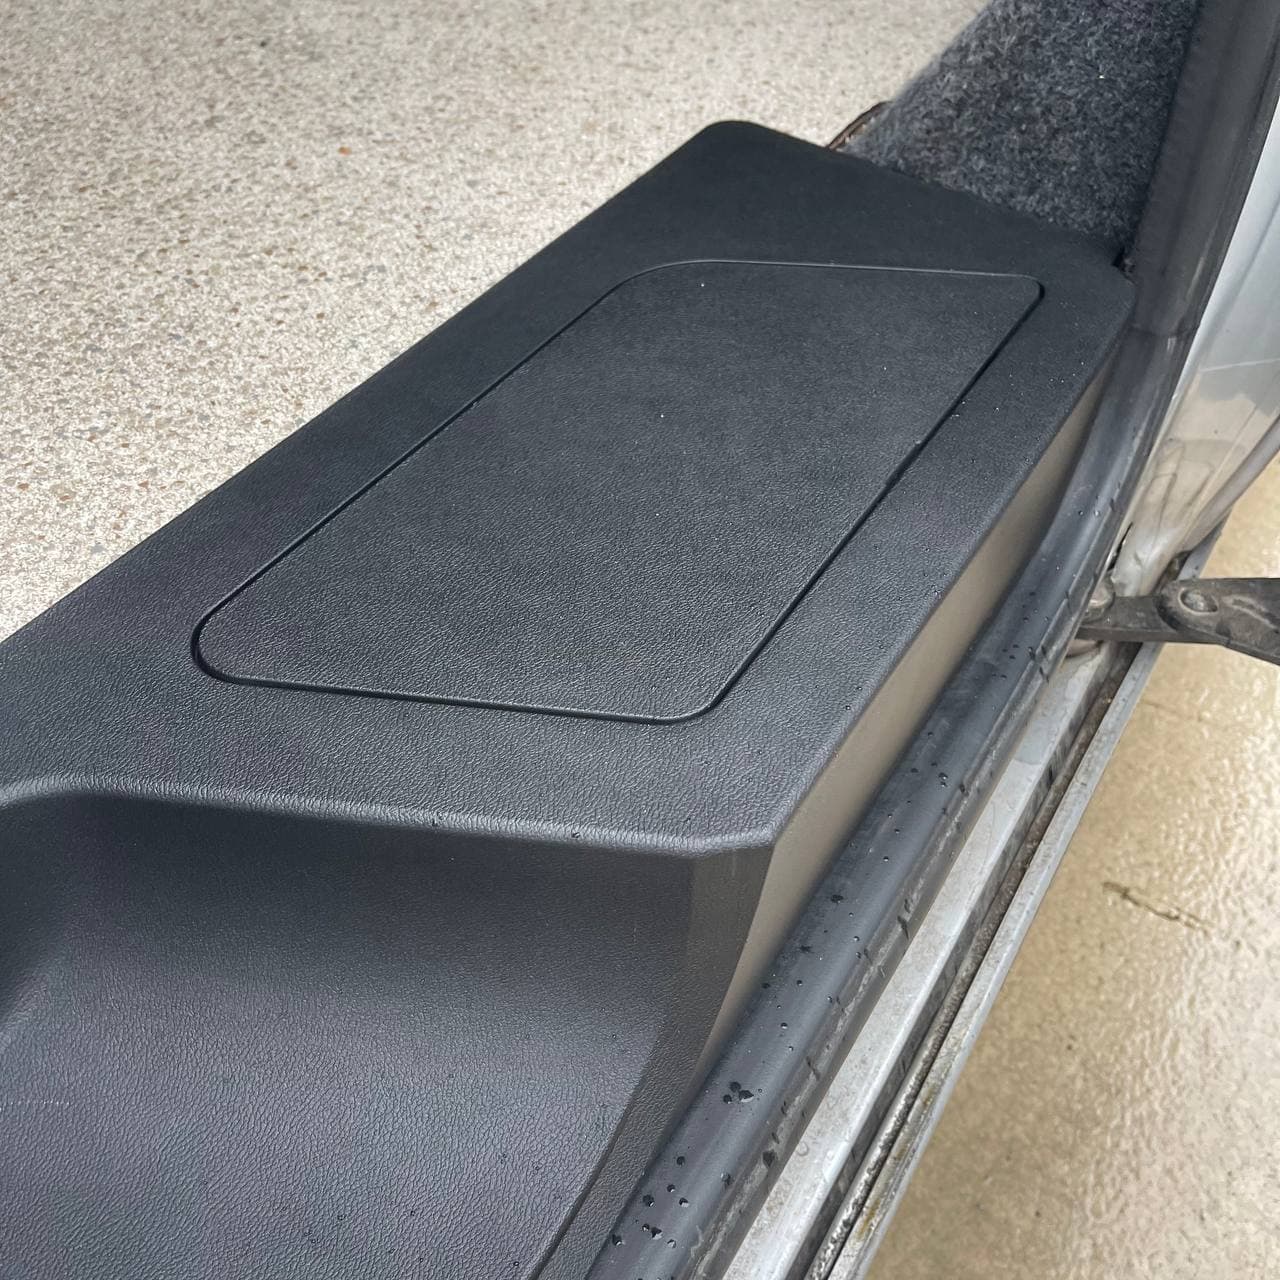 VW T6.1 Transporter Side Loading Door Step V3 17mm Extra Deep with Storage Compartment